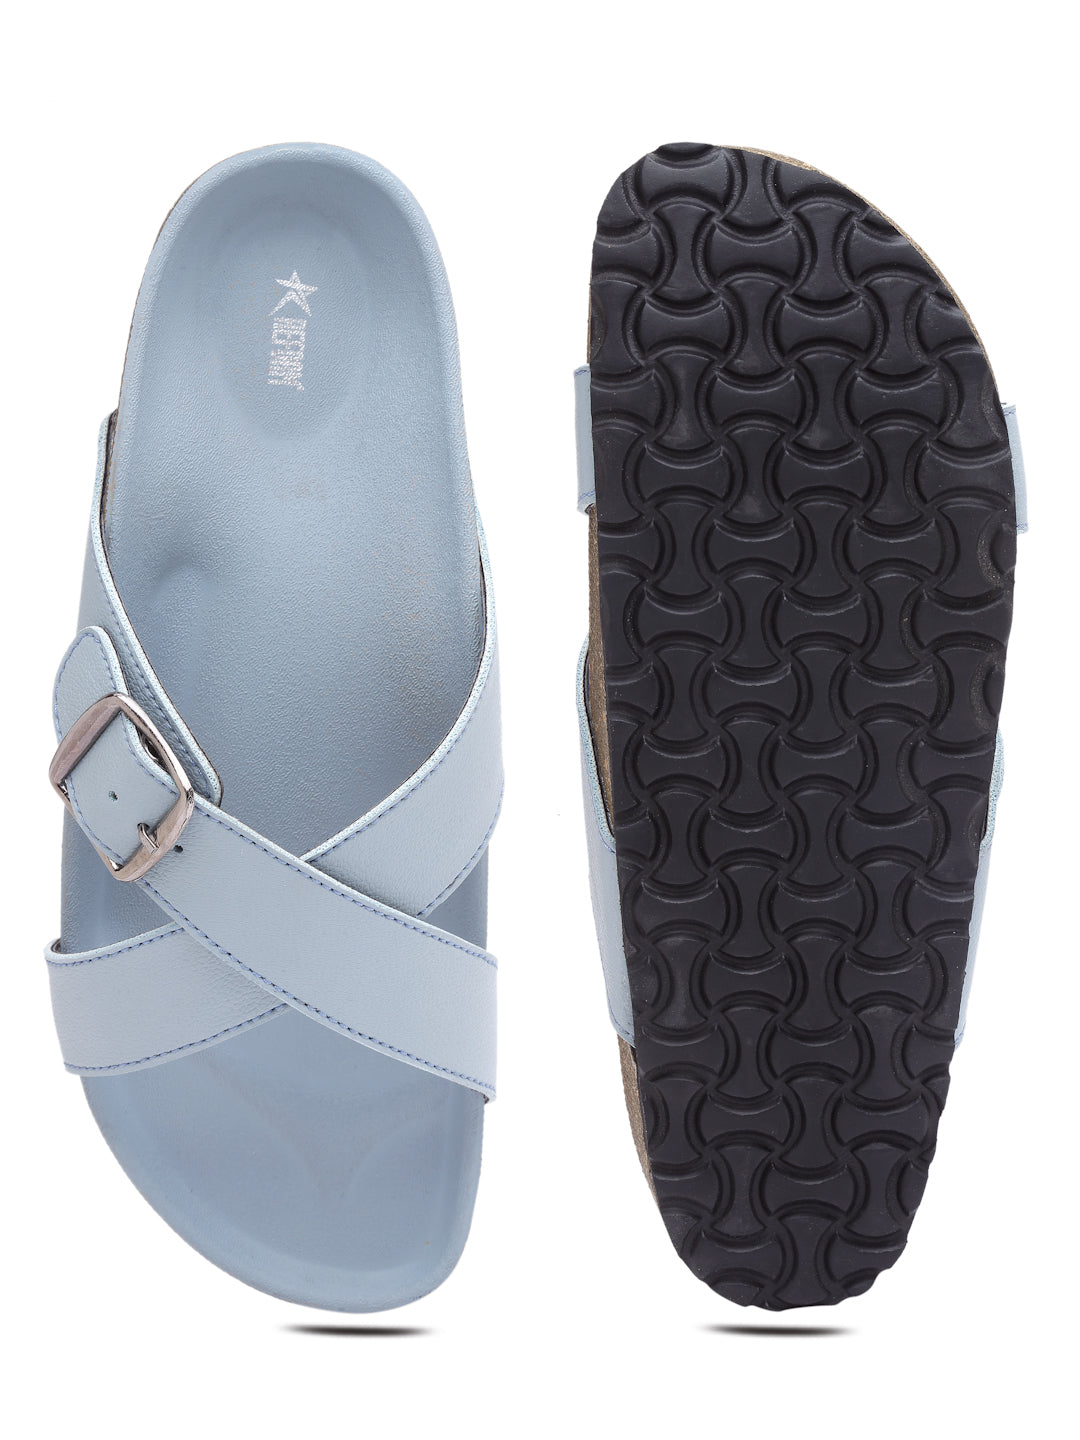 Women's Stylish Powder-Blue Synthetic Leather Casual Sandal